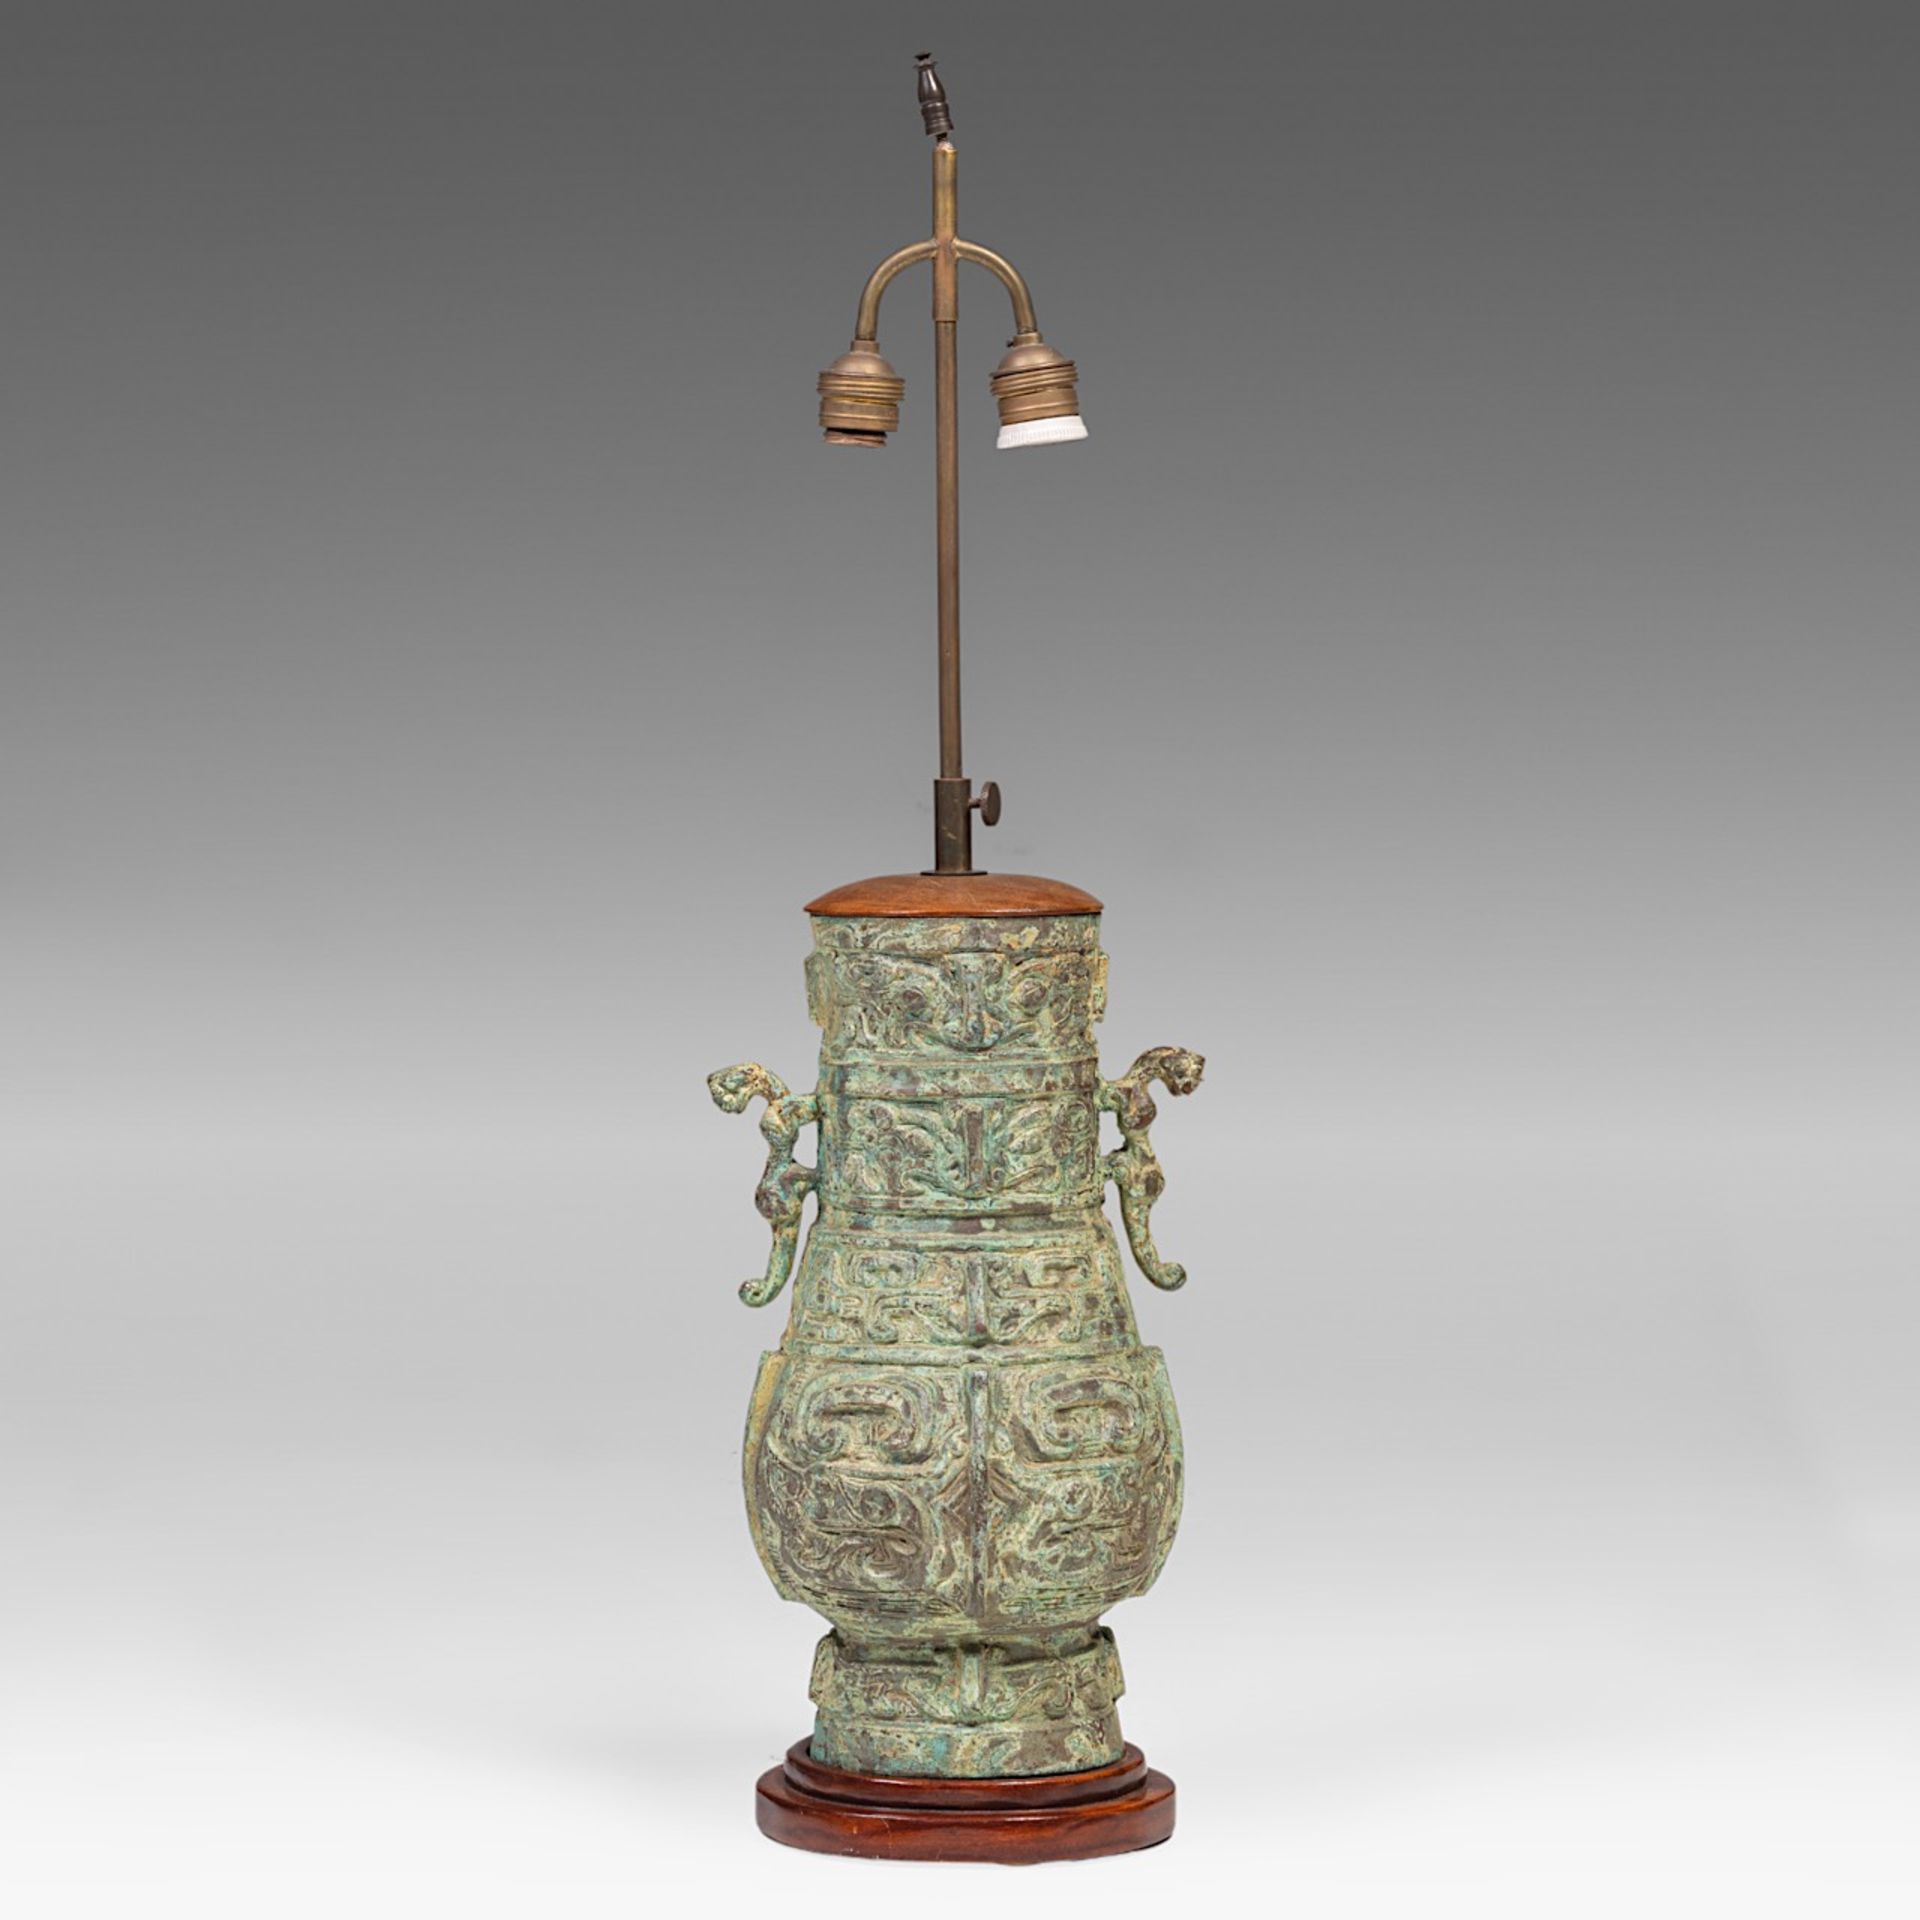 A Chinese archaistic bronze vase, fixed with lamp mounts, total H 75 cm